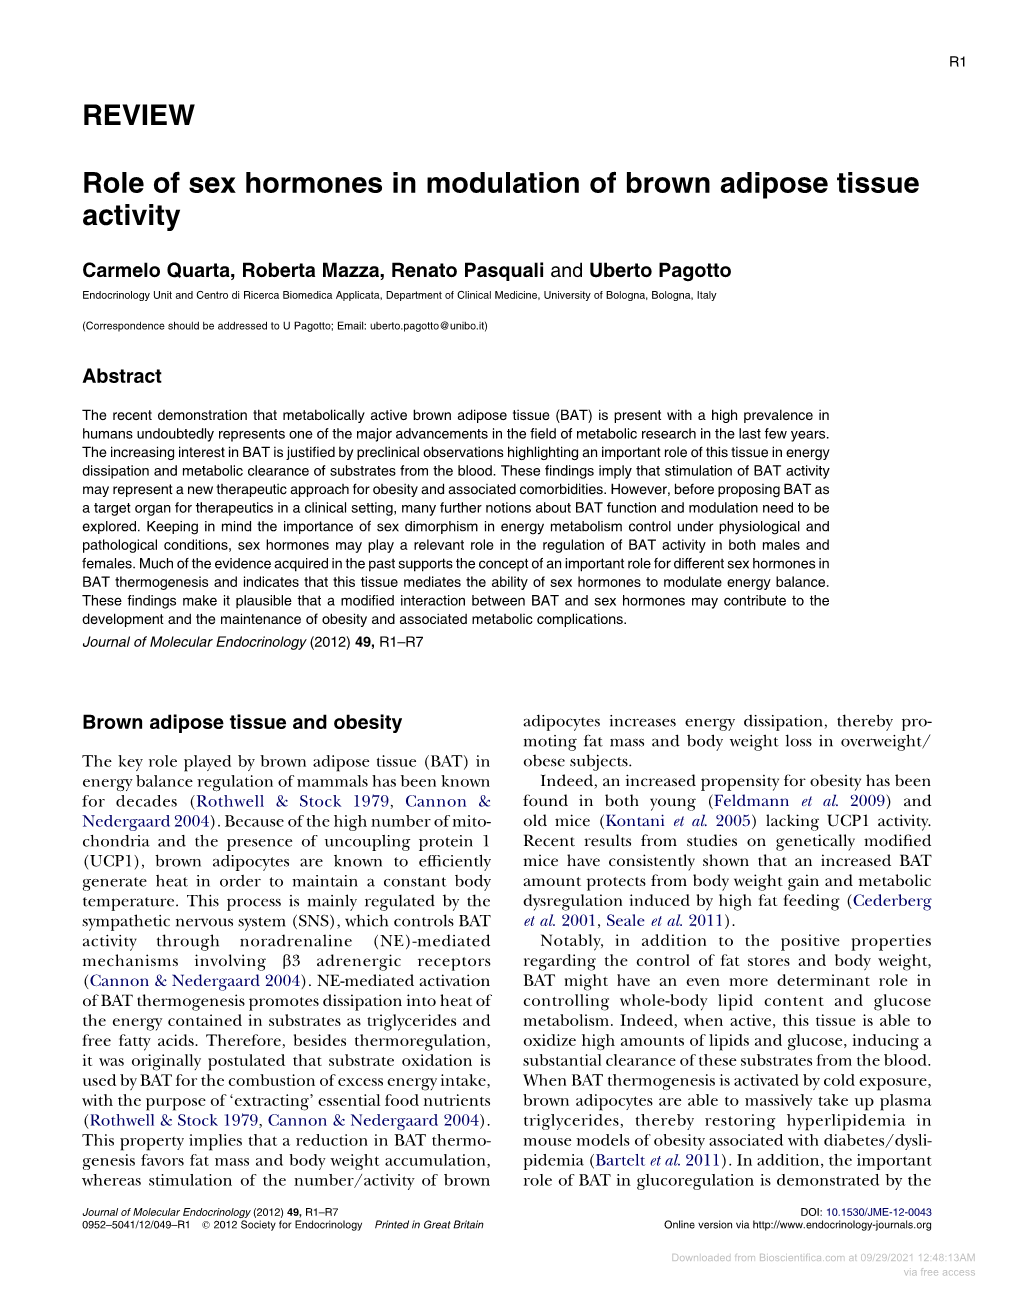 REVIEW Role of Sex Hormones in Modulation of Brown Adipose Tissue